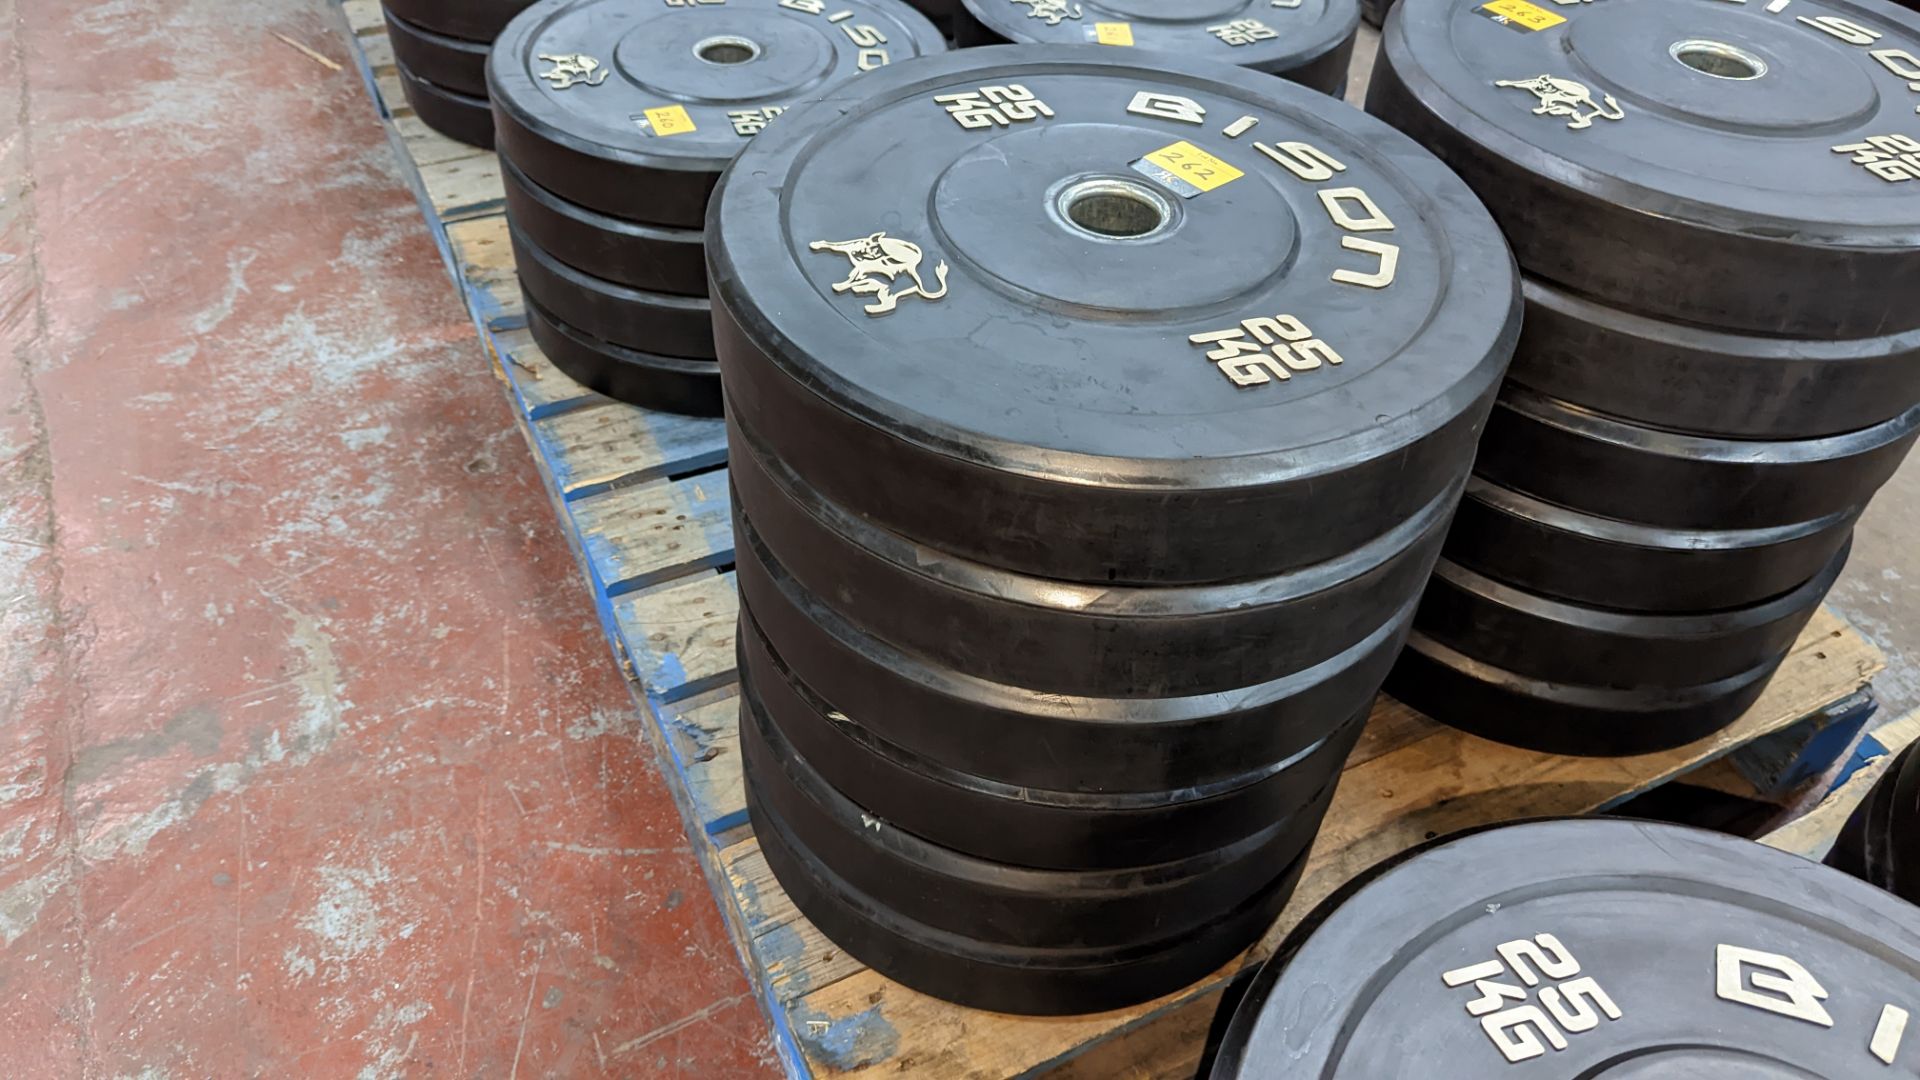 6 off Bison 25kg rubberised Olympic plates - Image 3 of 3